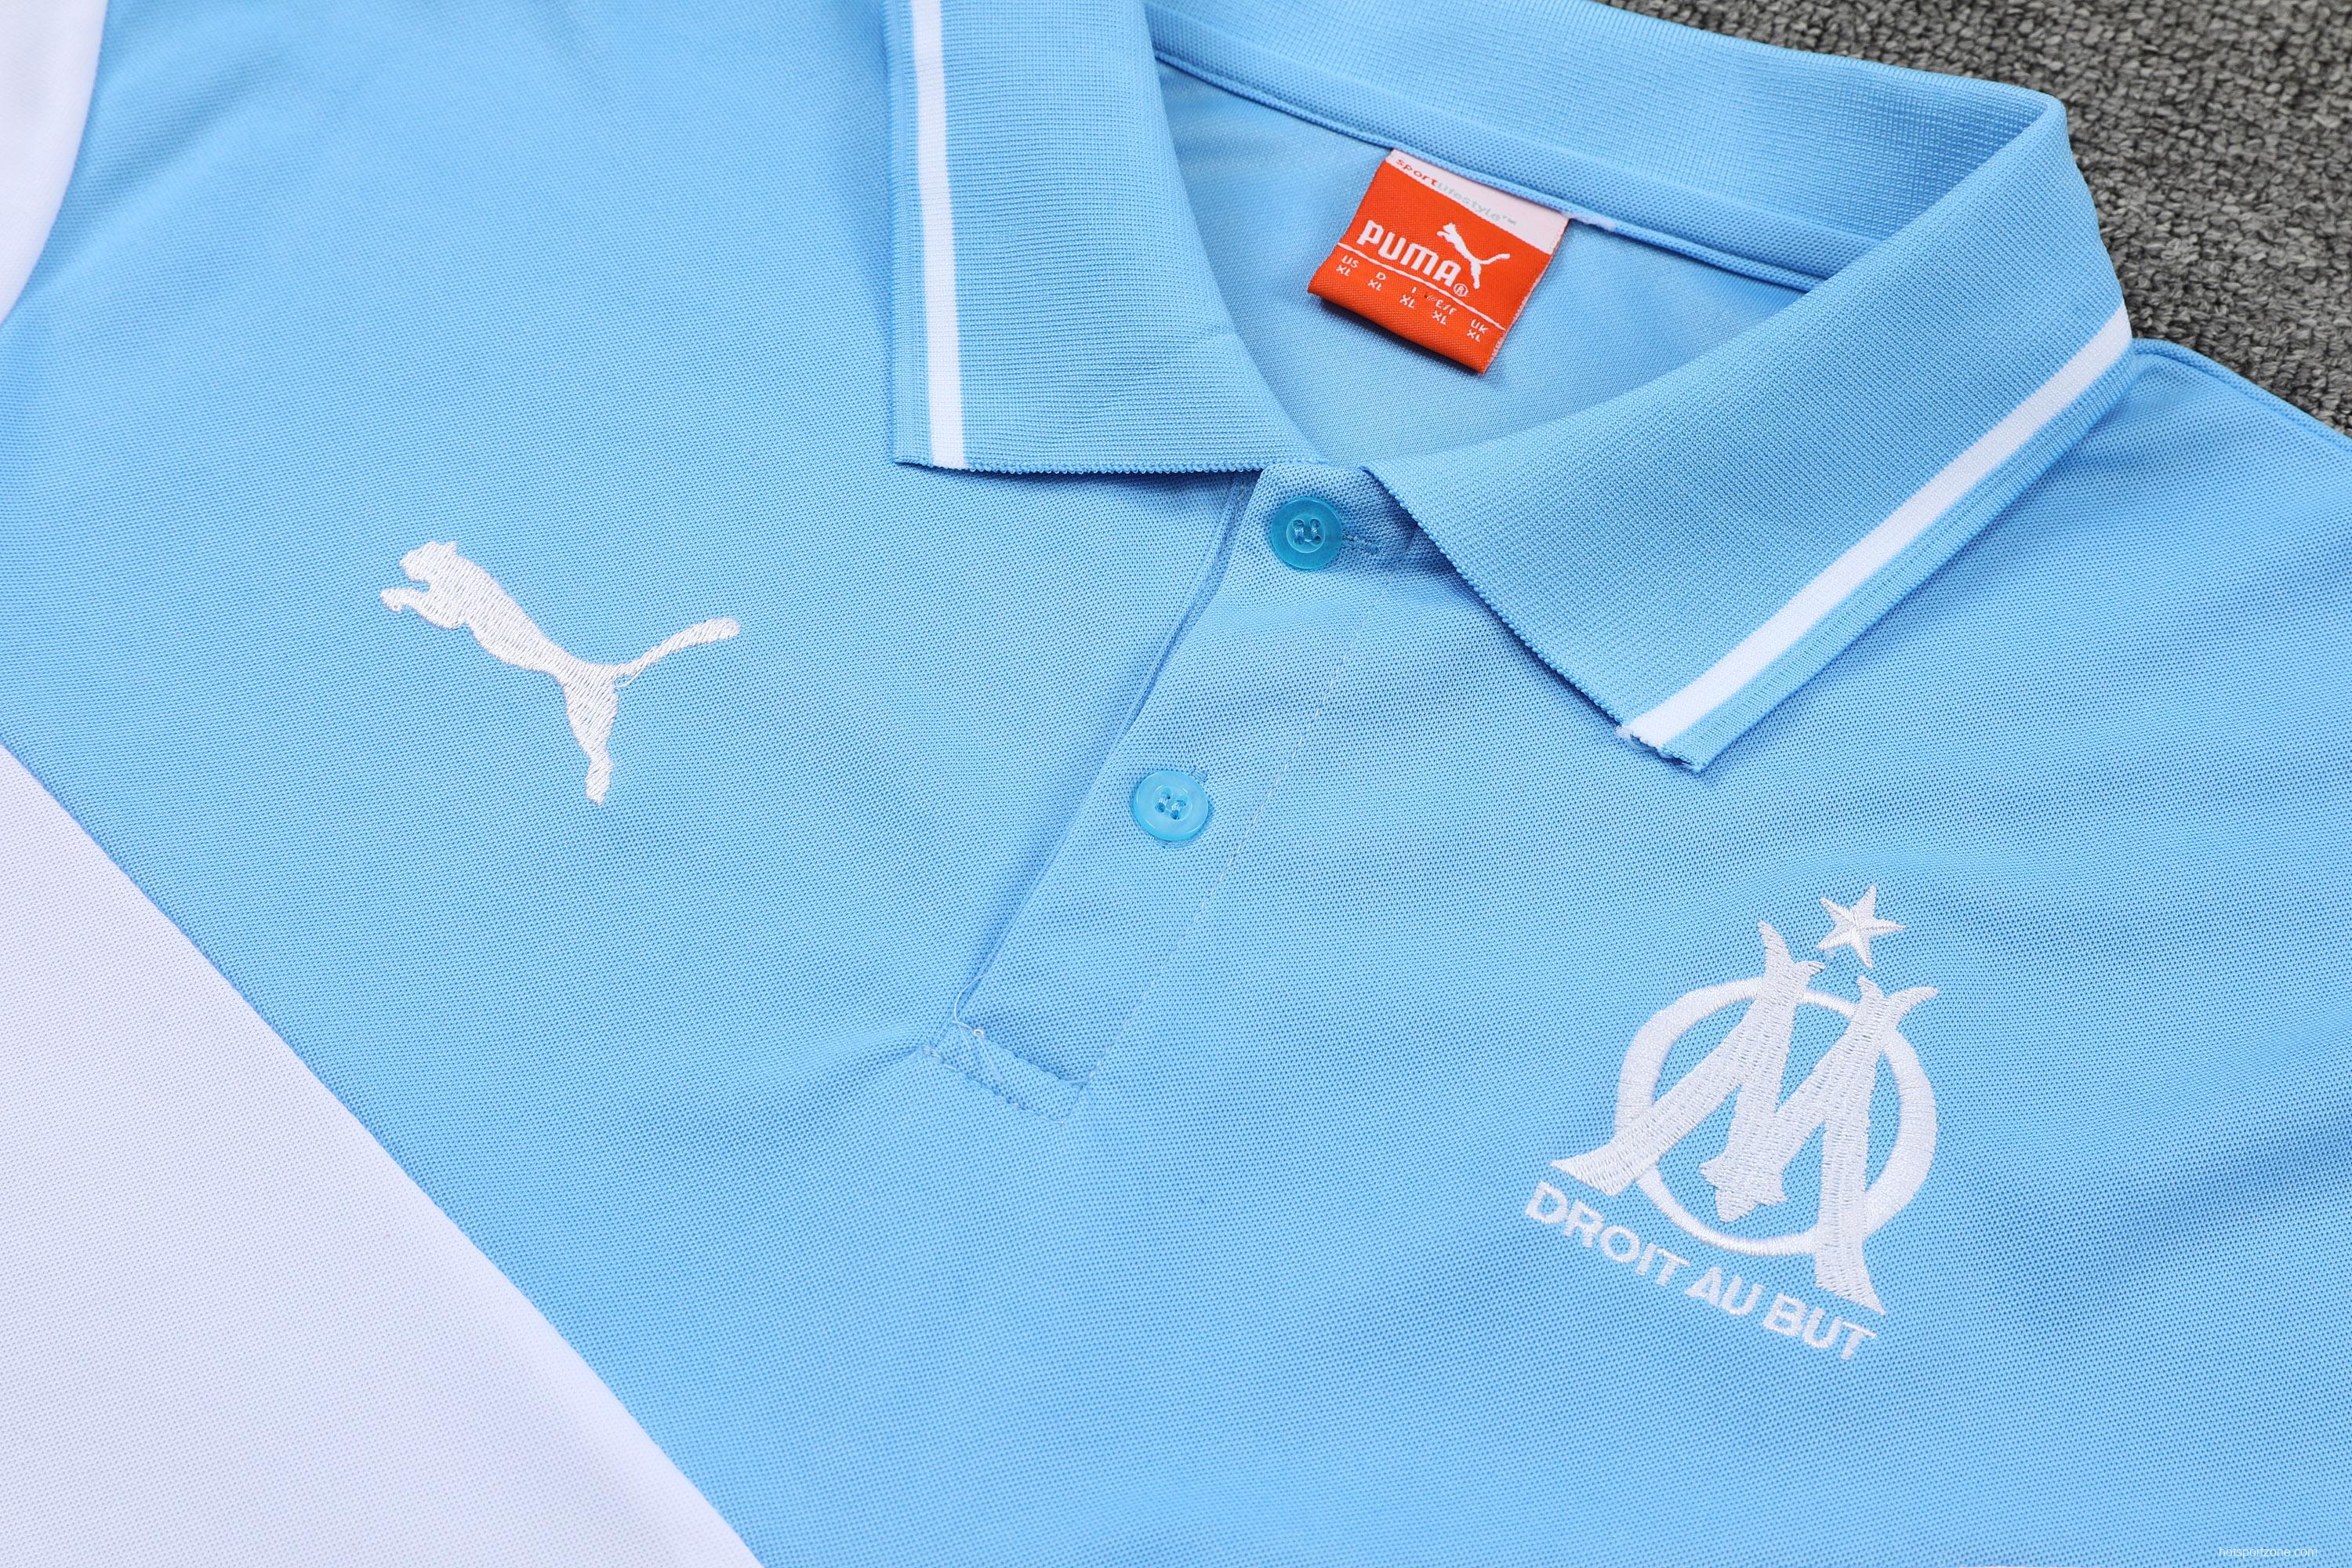 Olympique de Marseille POLO kit blue and white (not sold separately)